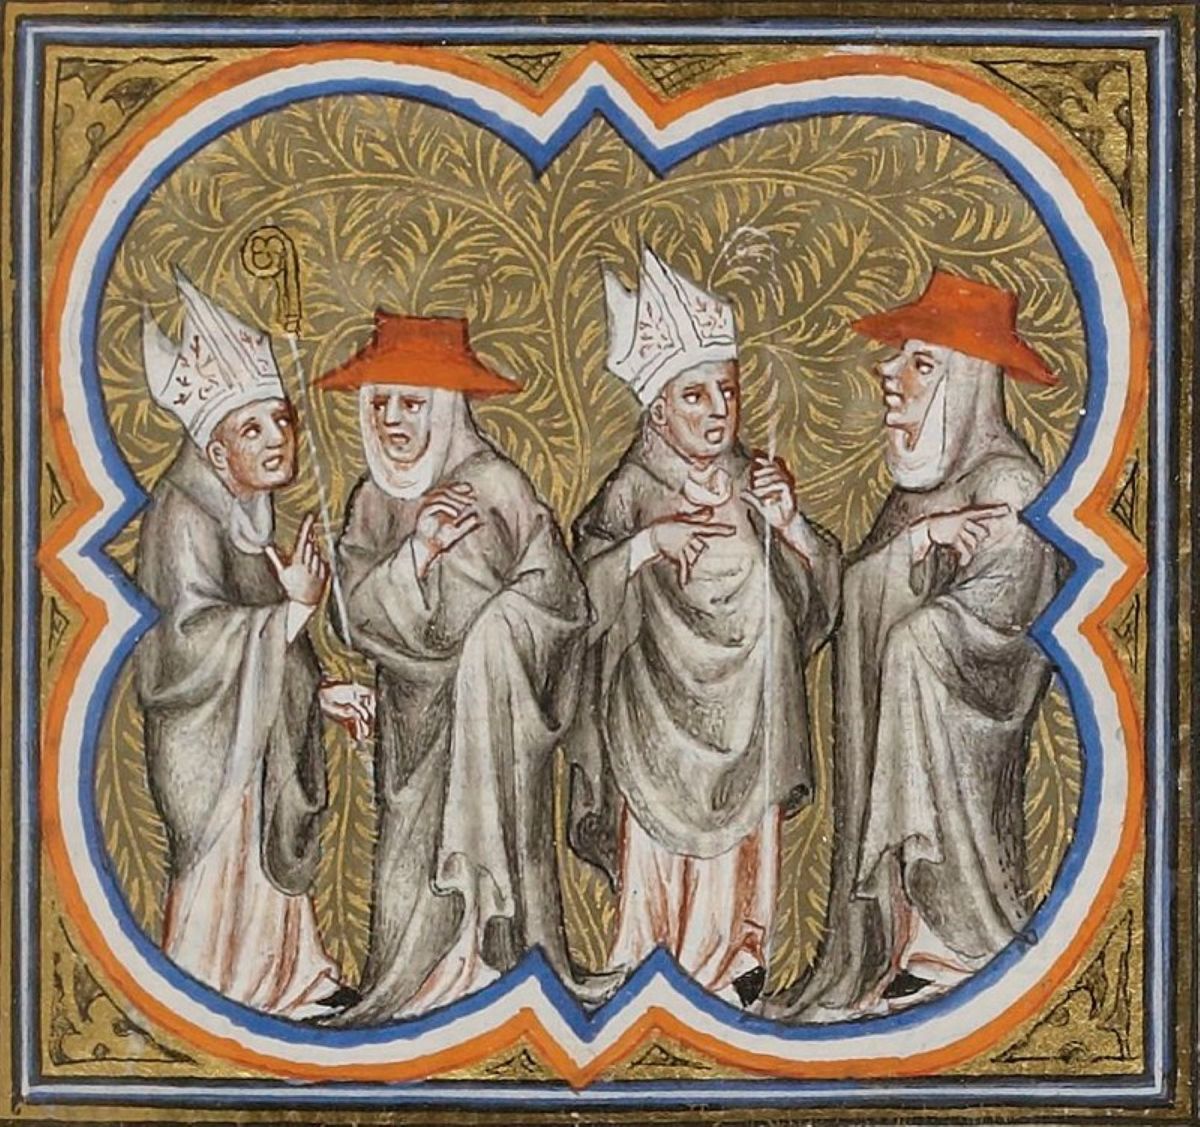 A 14th-century representation of the Western Schism. 